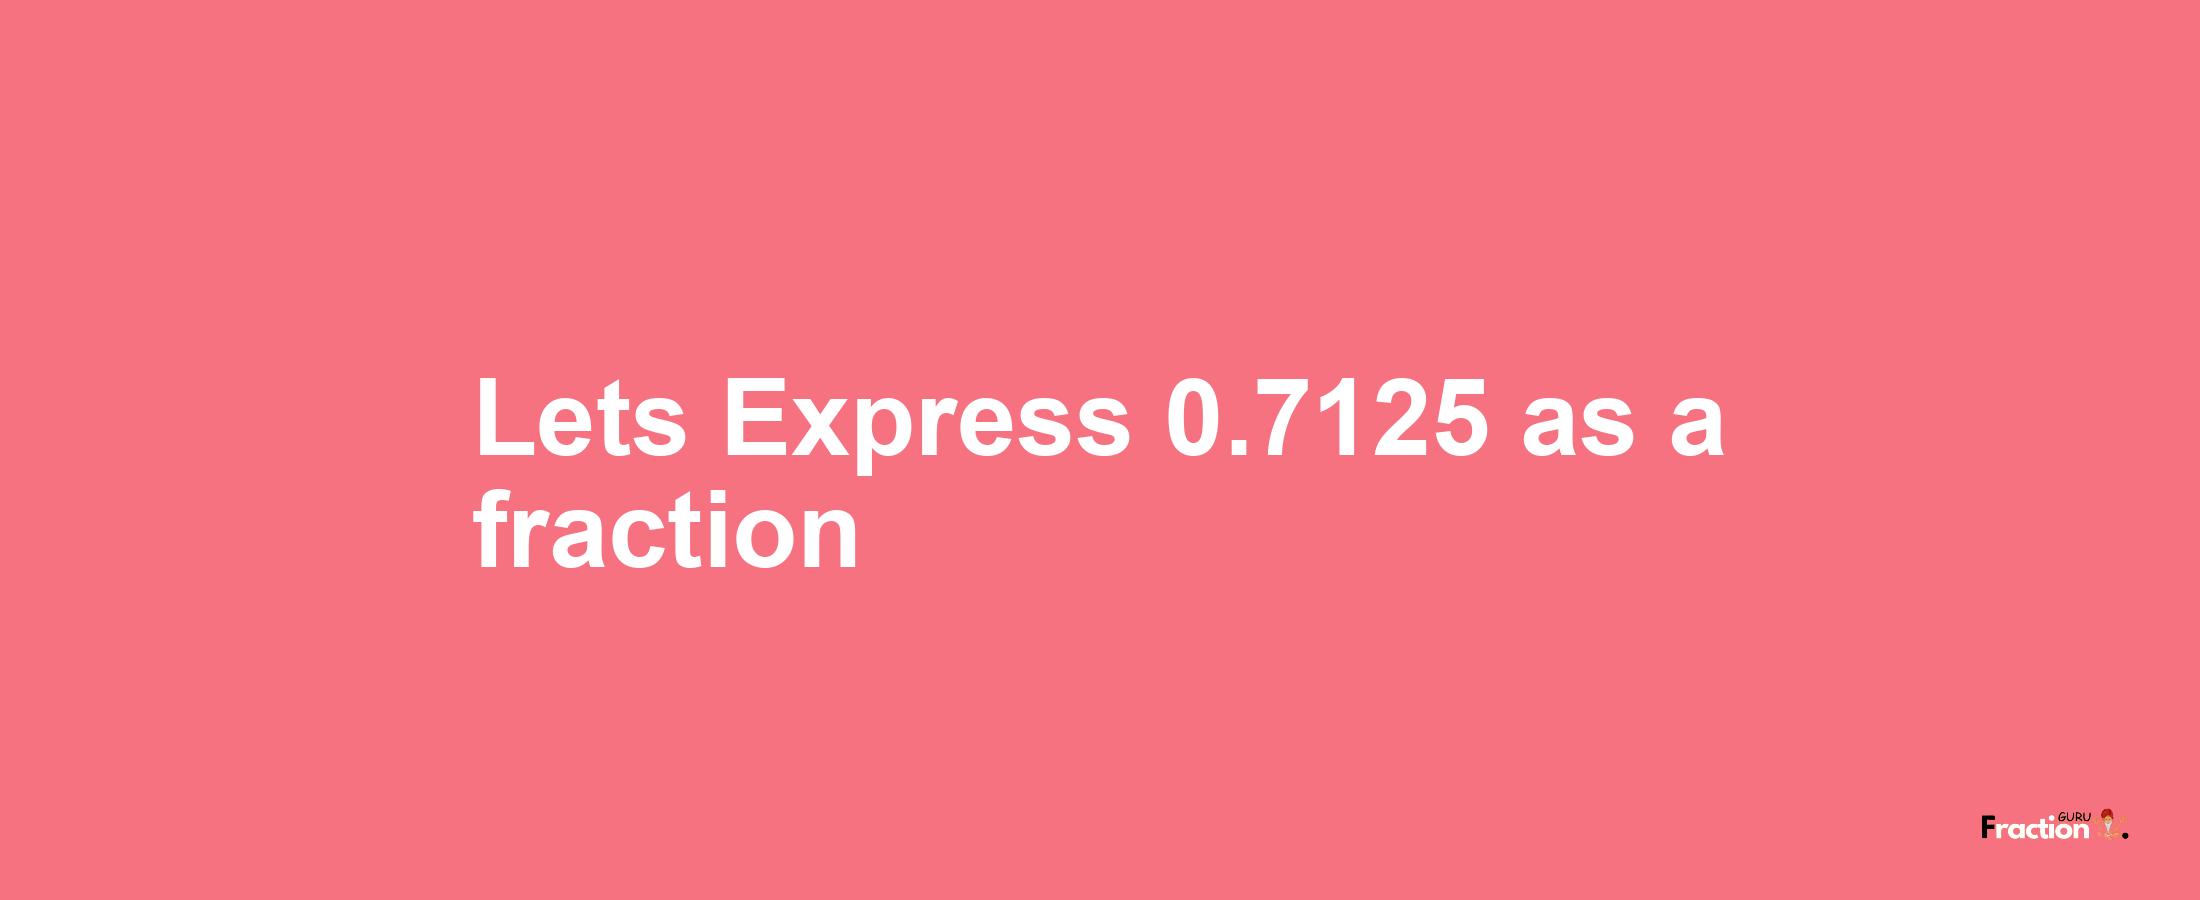 Lets Express 0.7125 as afraction